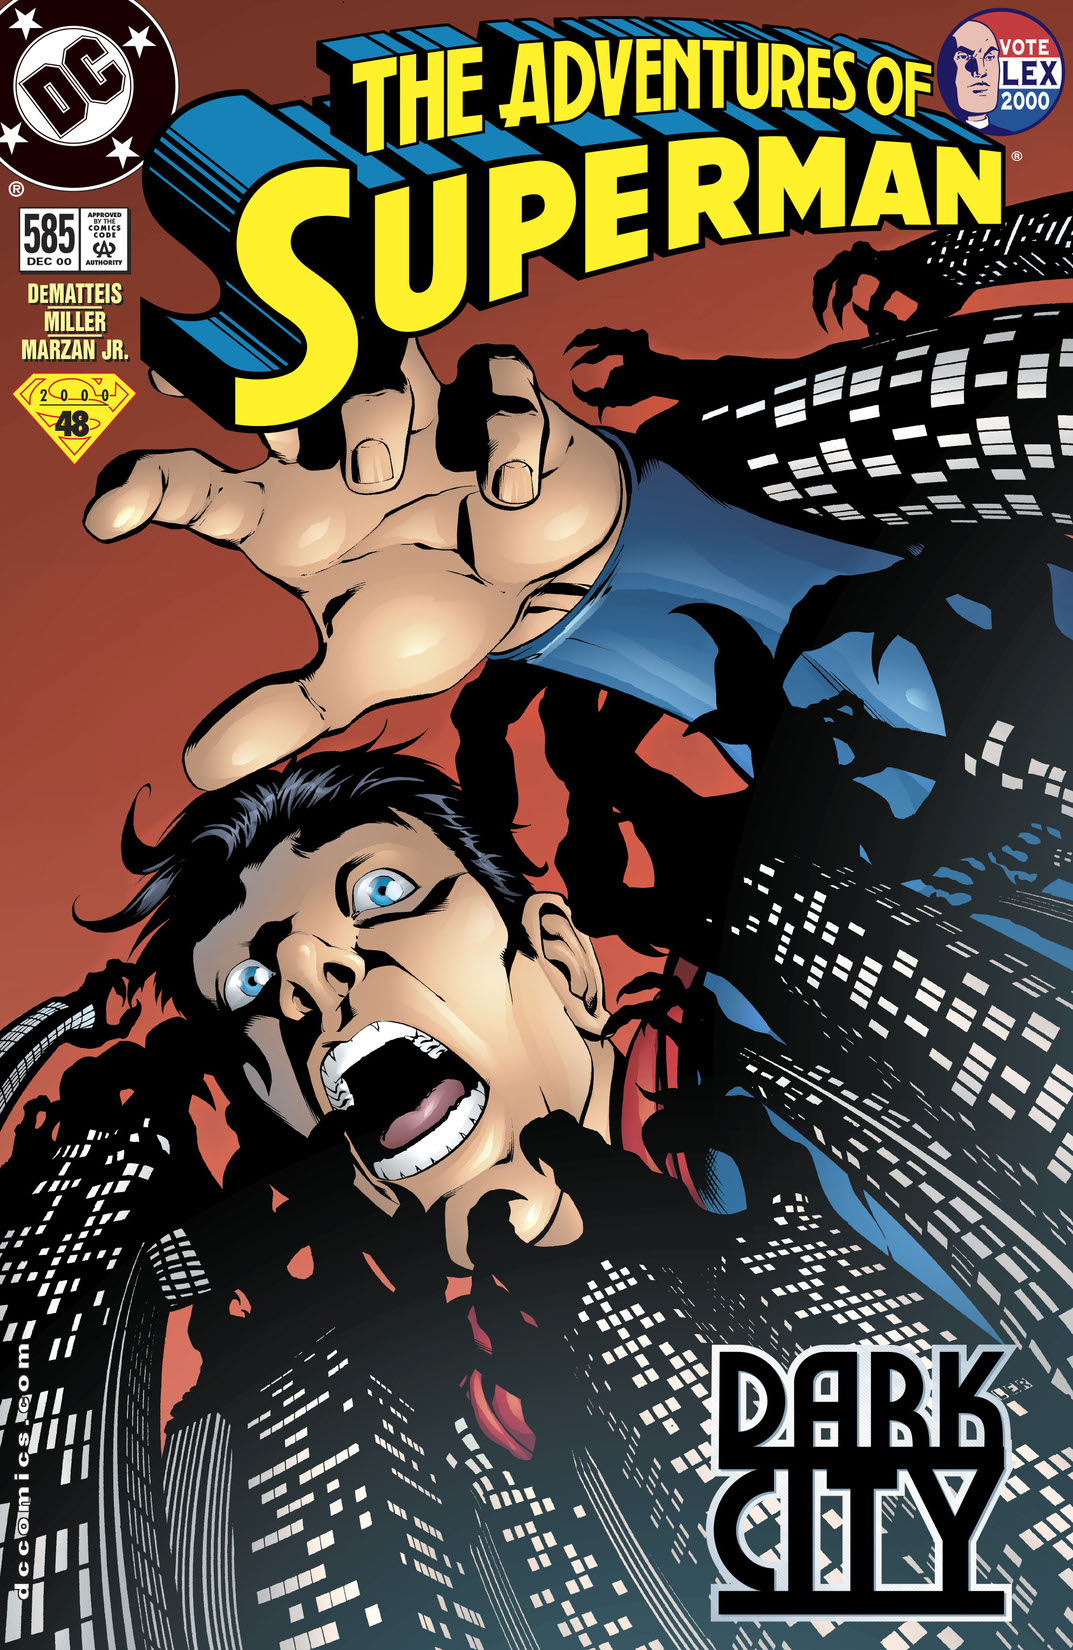 Adventures of Superman (1987-2006) #585 preview images